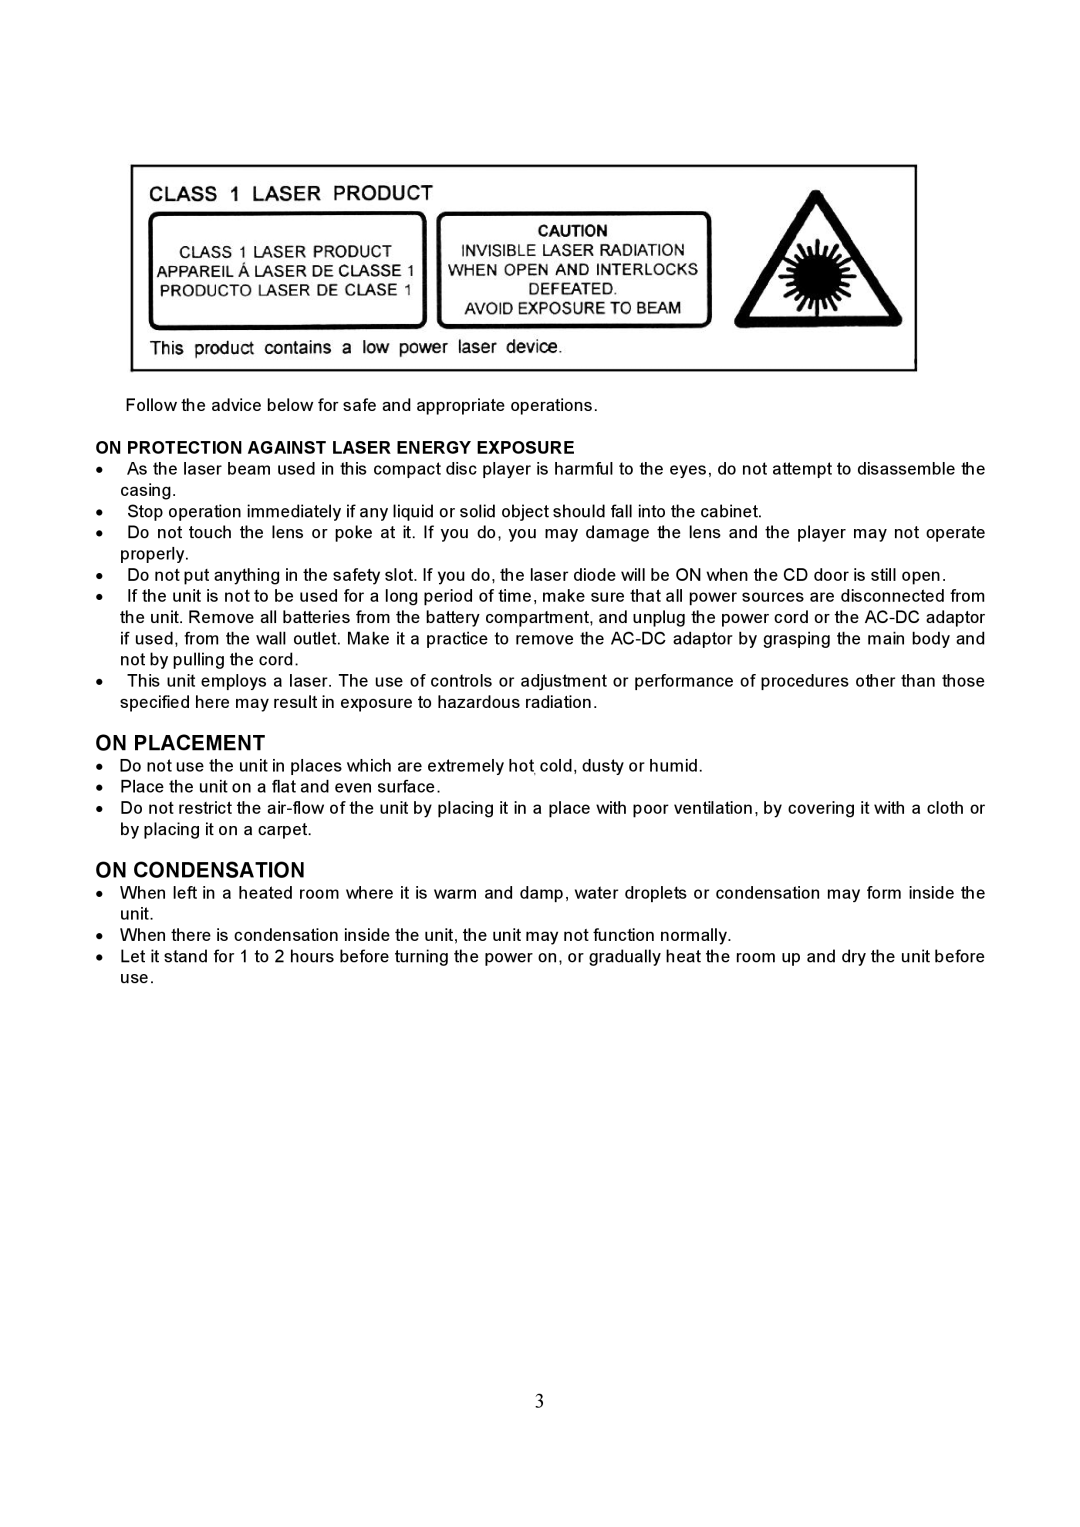 Curtis RCD224UK operating instructions On Placement, On Condensation, On Protection Against Laser Energy Exposure 